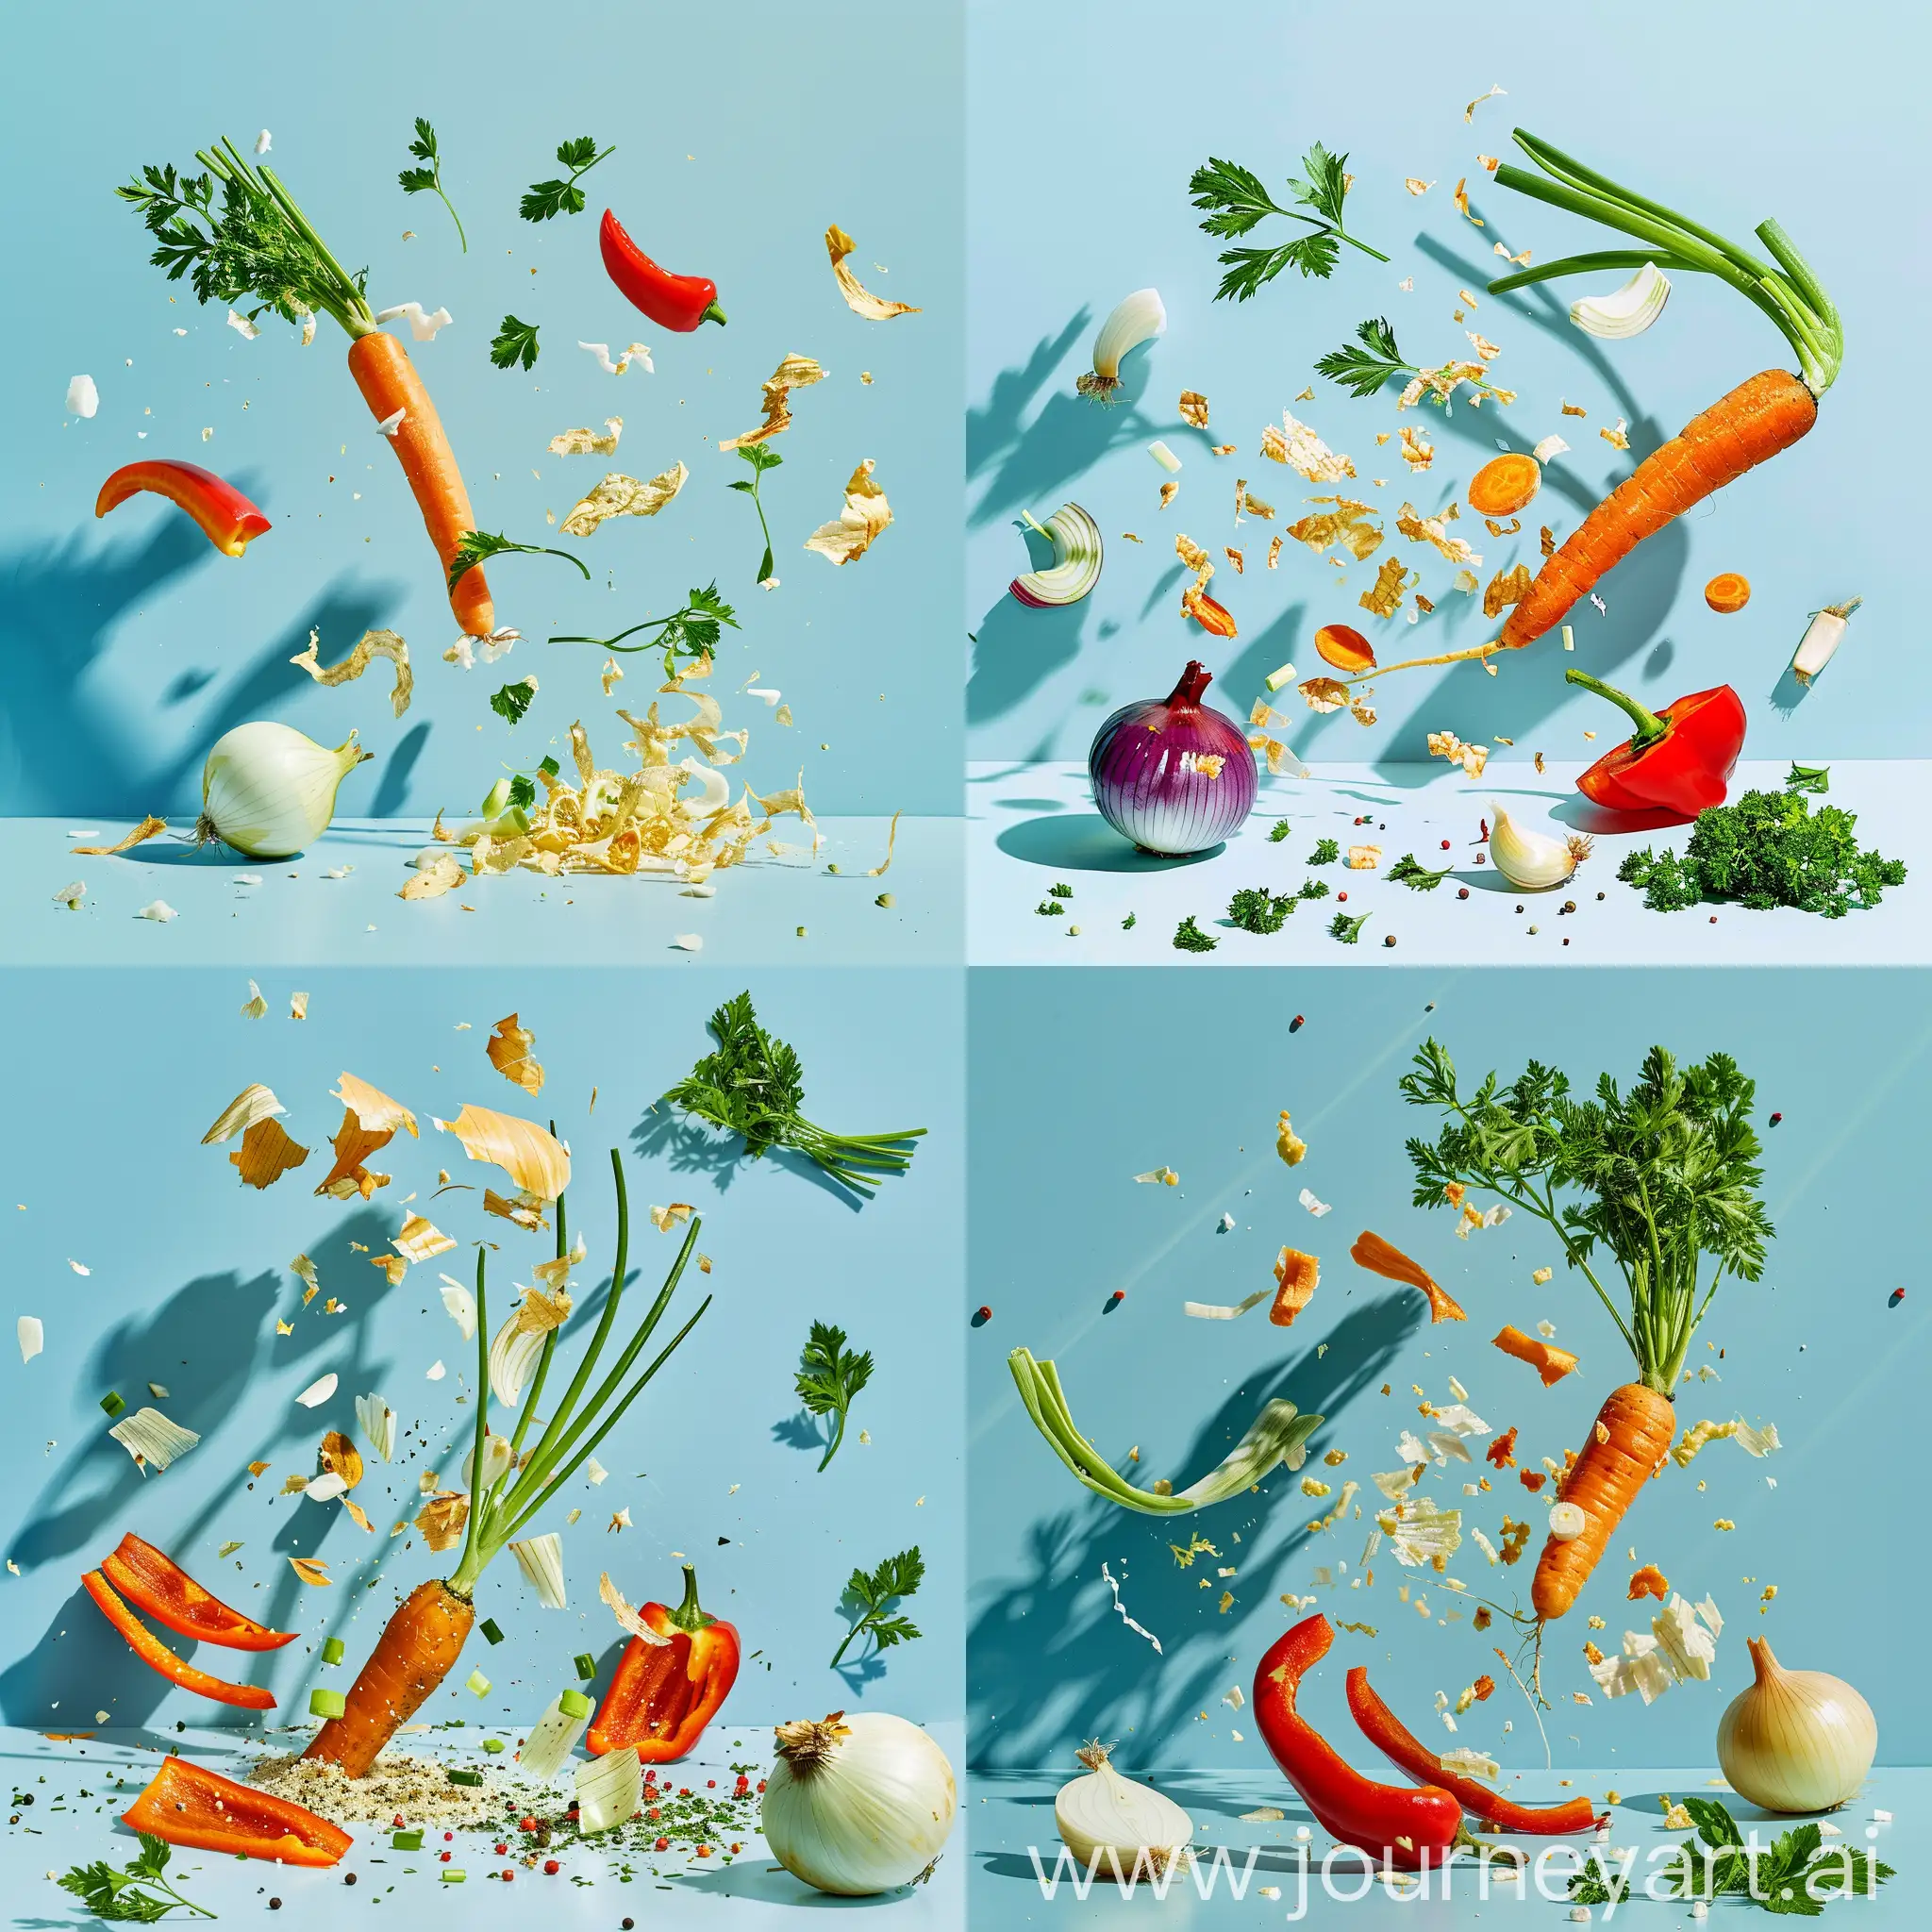 Vibrant-Vegetable-Explosion-Fresh-Produce-Bursting-with-Color-on-Blue-Background